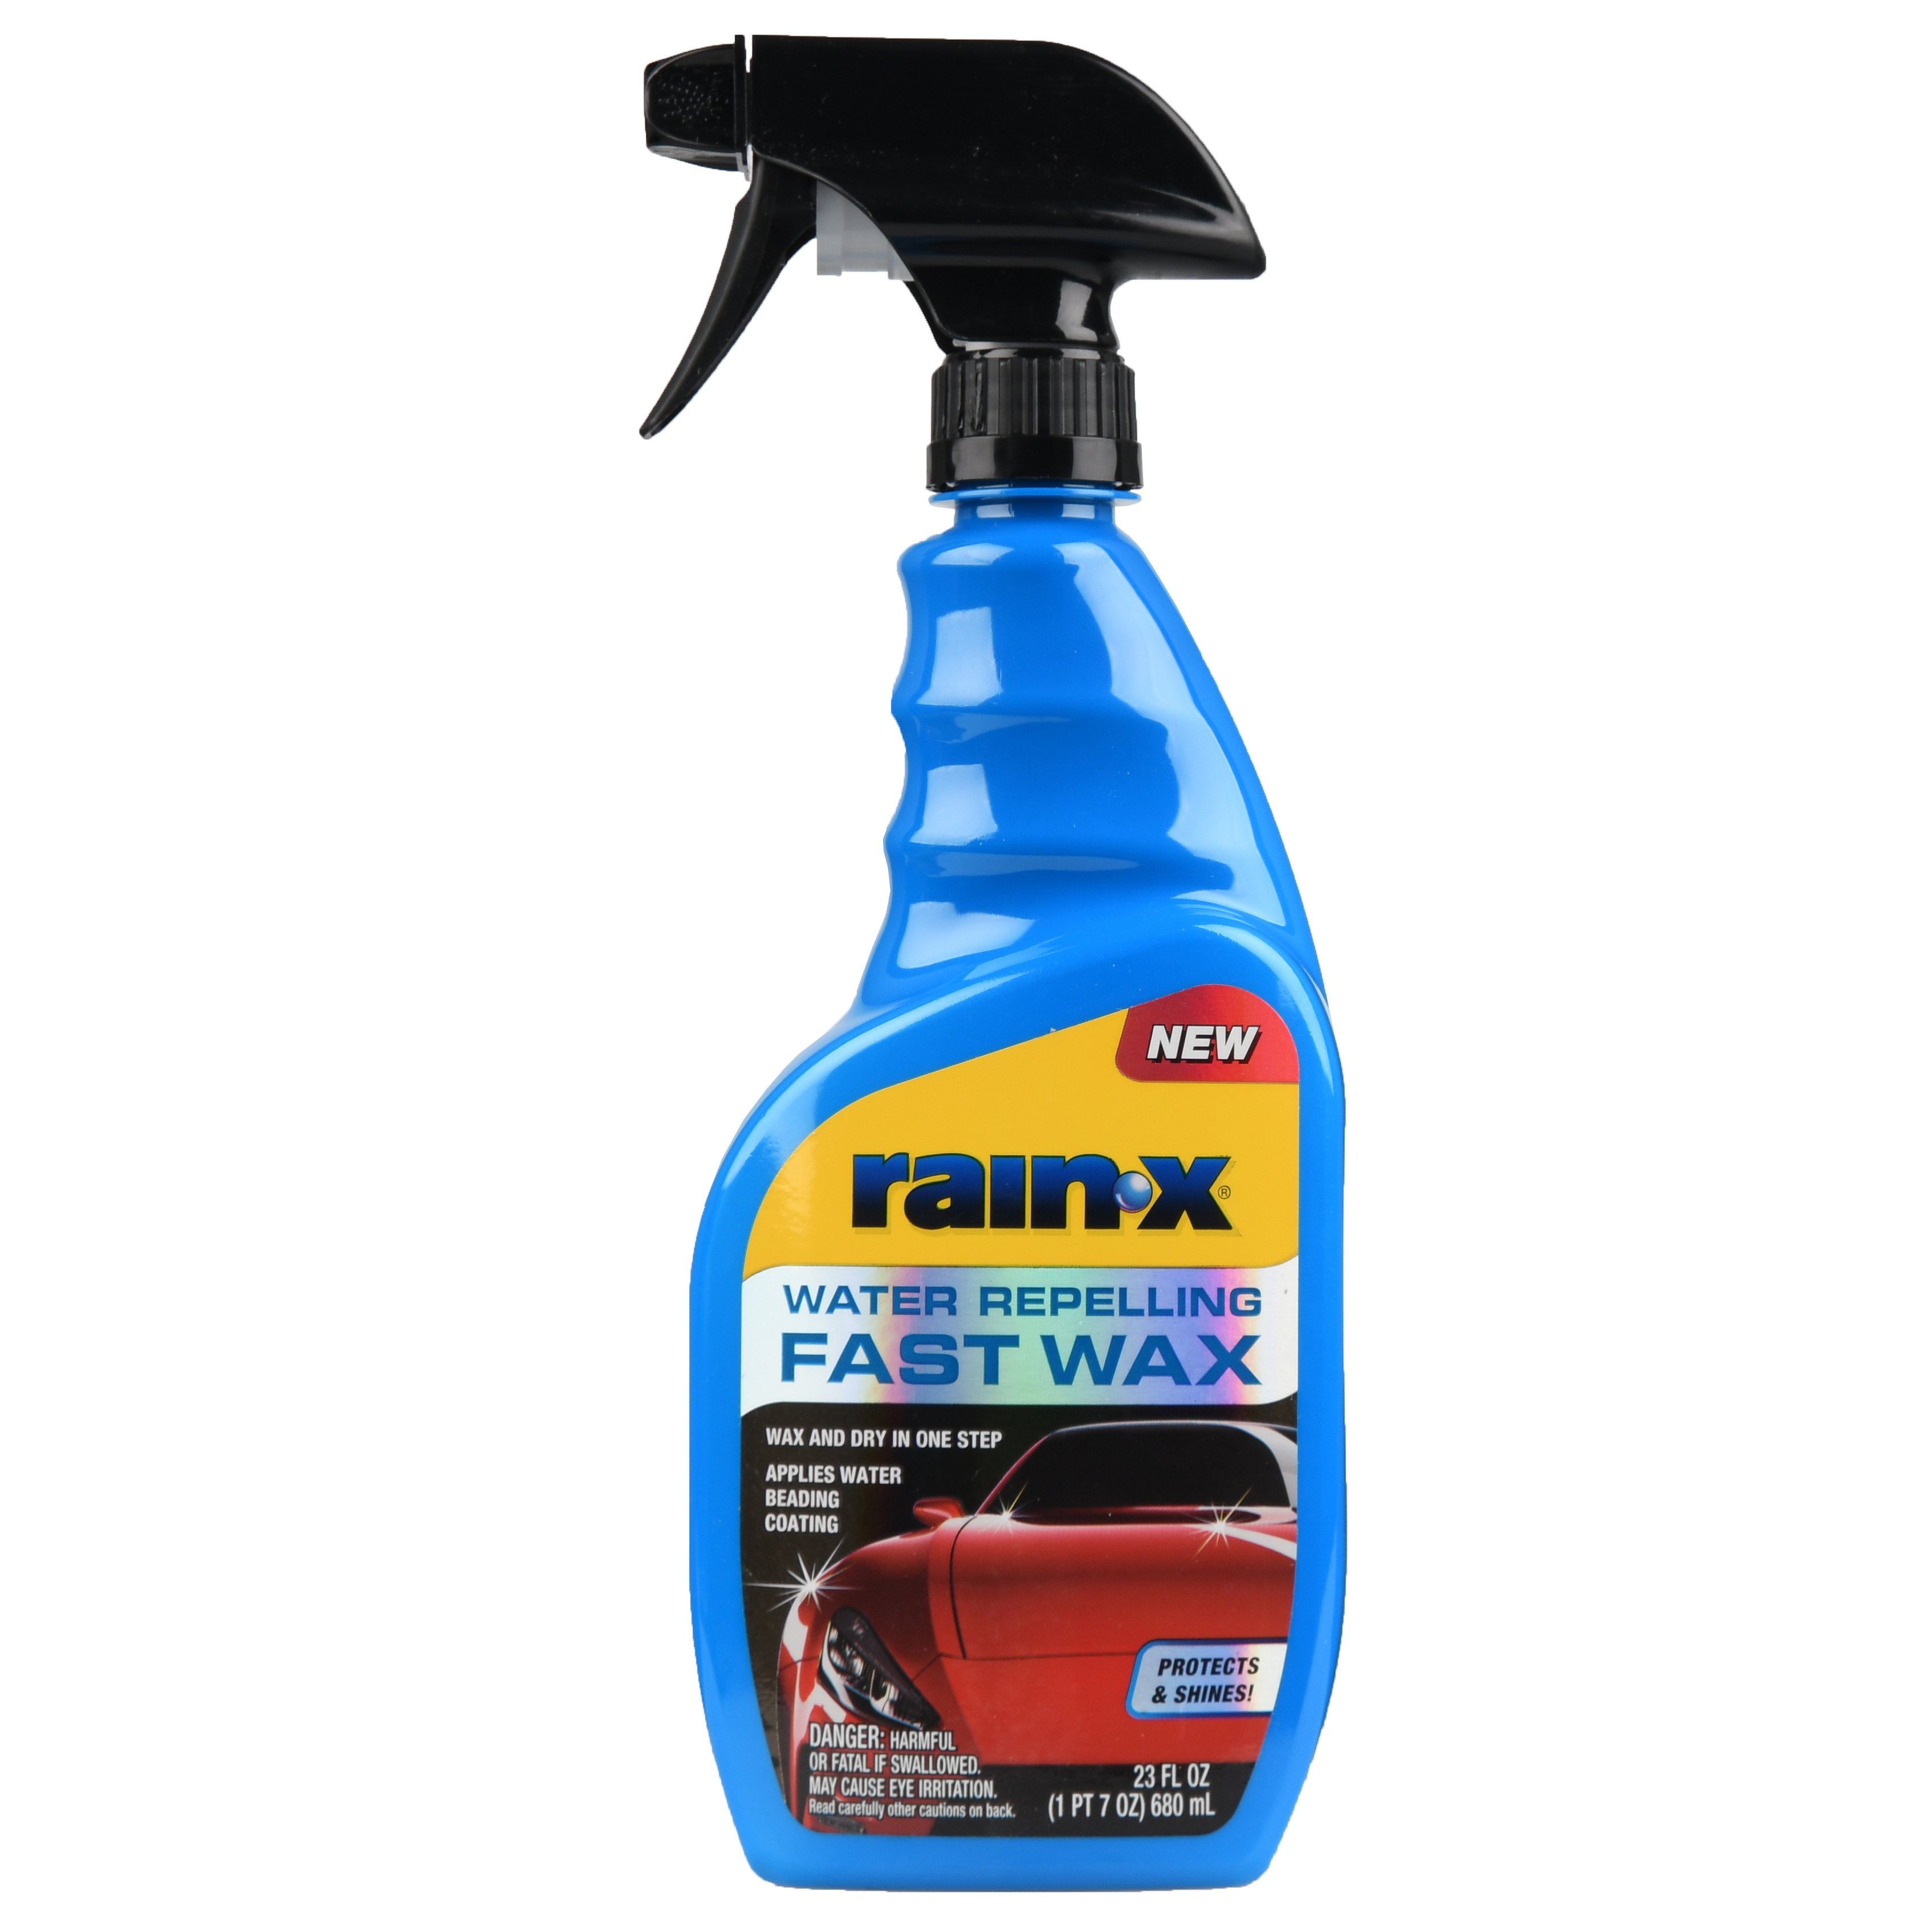 Rain-X 2-IN-1 Spray Fast Wax and Water Repellent - 620118W - image 1 of 3